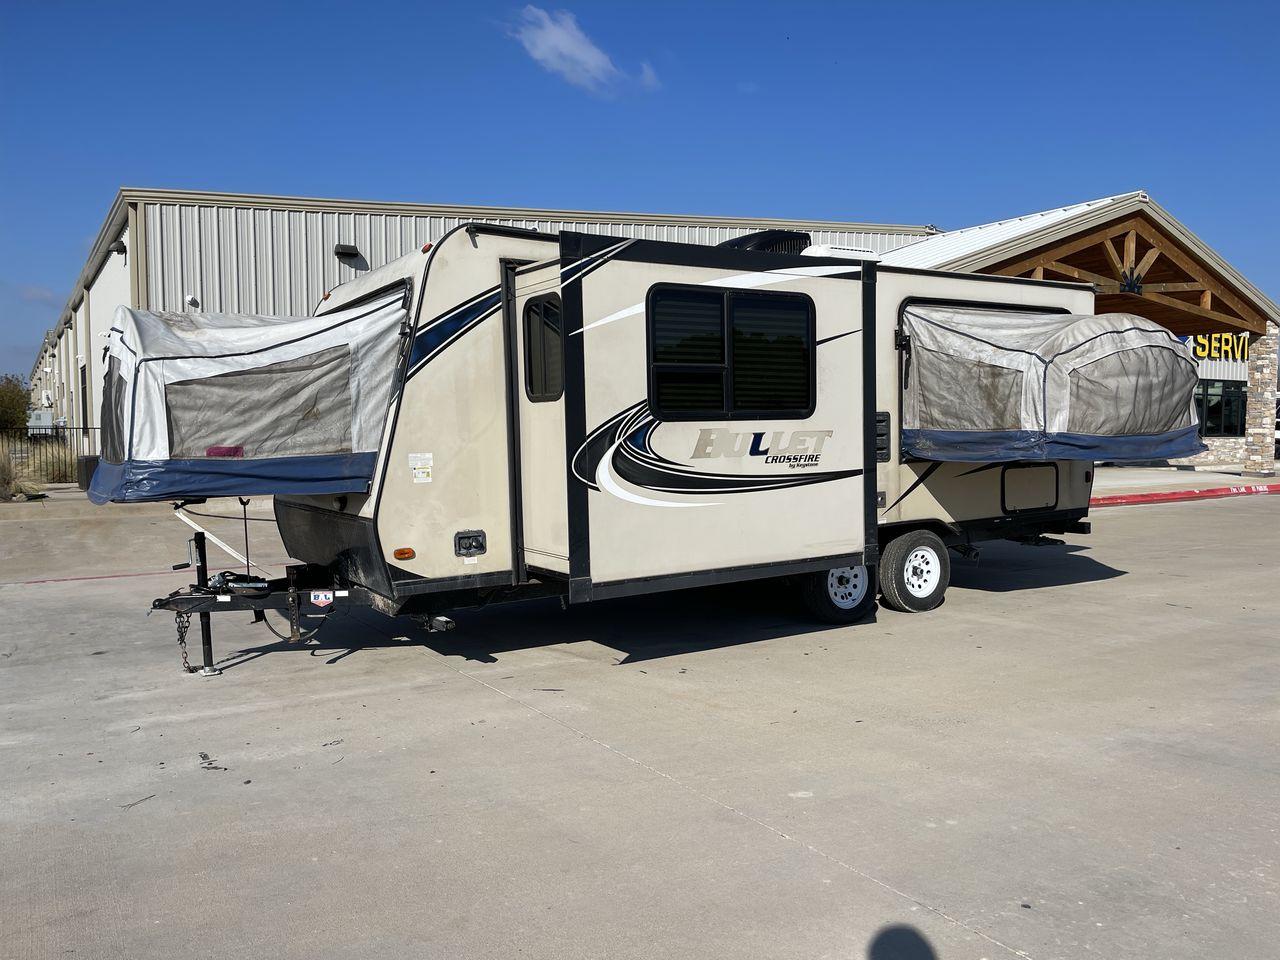 2018 BULLET CROSSFIRE 2190EX (4YDT21923JT) , Length: 25.08 ft. | Dry Weight: 4,410 lbs. | Gross Weight: 6,300 lbs. | Slides: 1 transmission, located at 4319 N Main St, Cleburne, TX, 76033, (817) 678-5133, 32.385960, -97.391212 - Photo #24